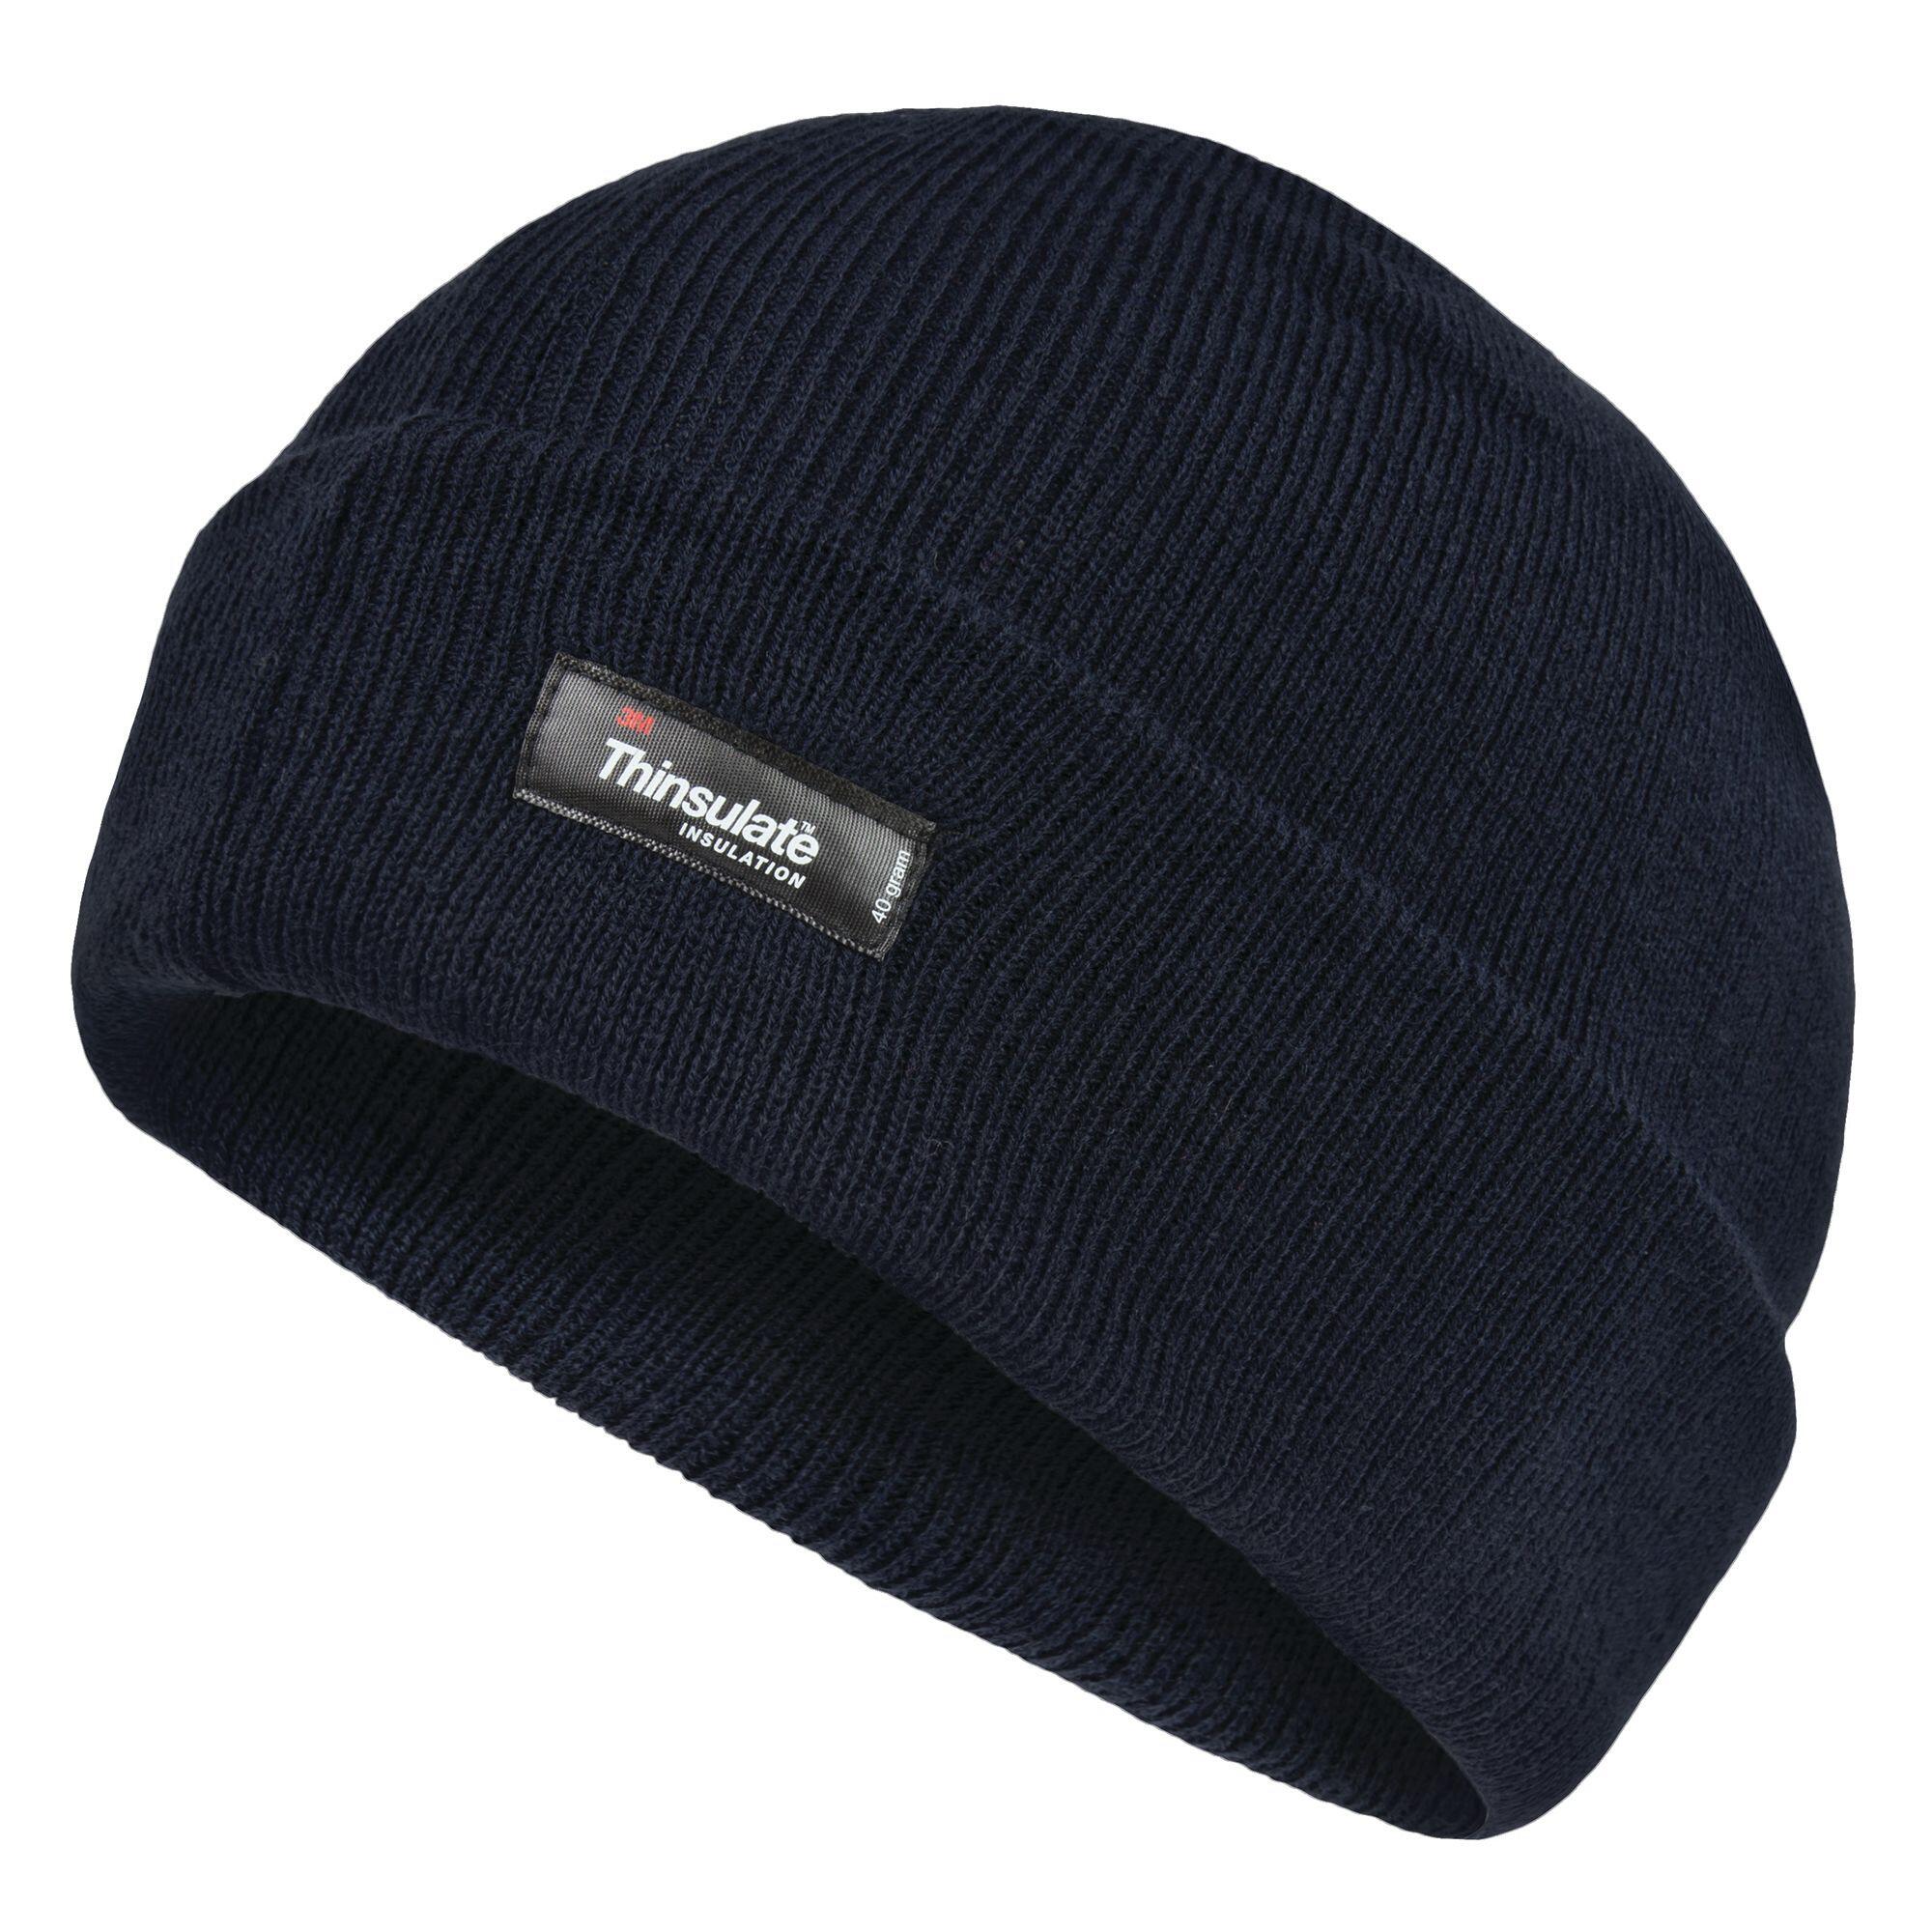 Mens Thinsulate Thermal Winter Hat (Navy) 3/4